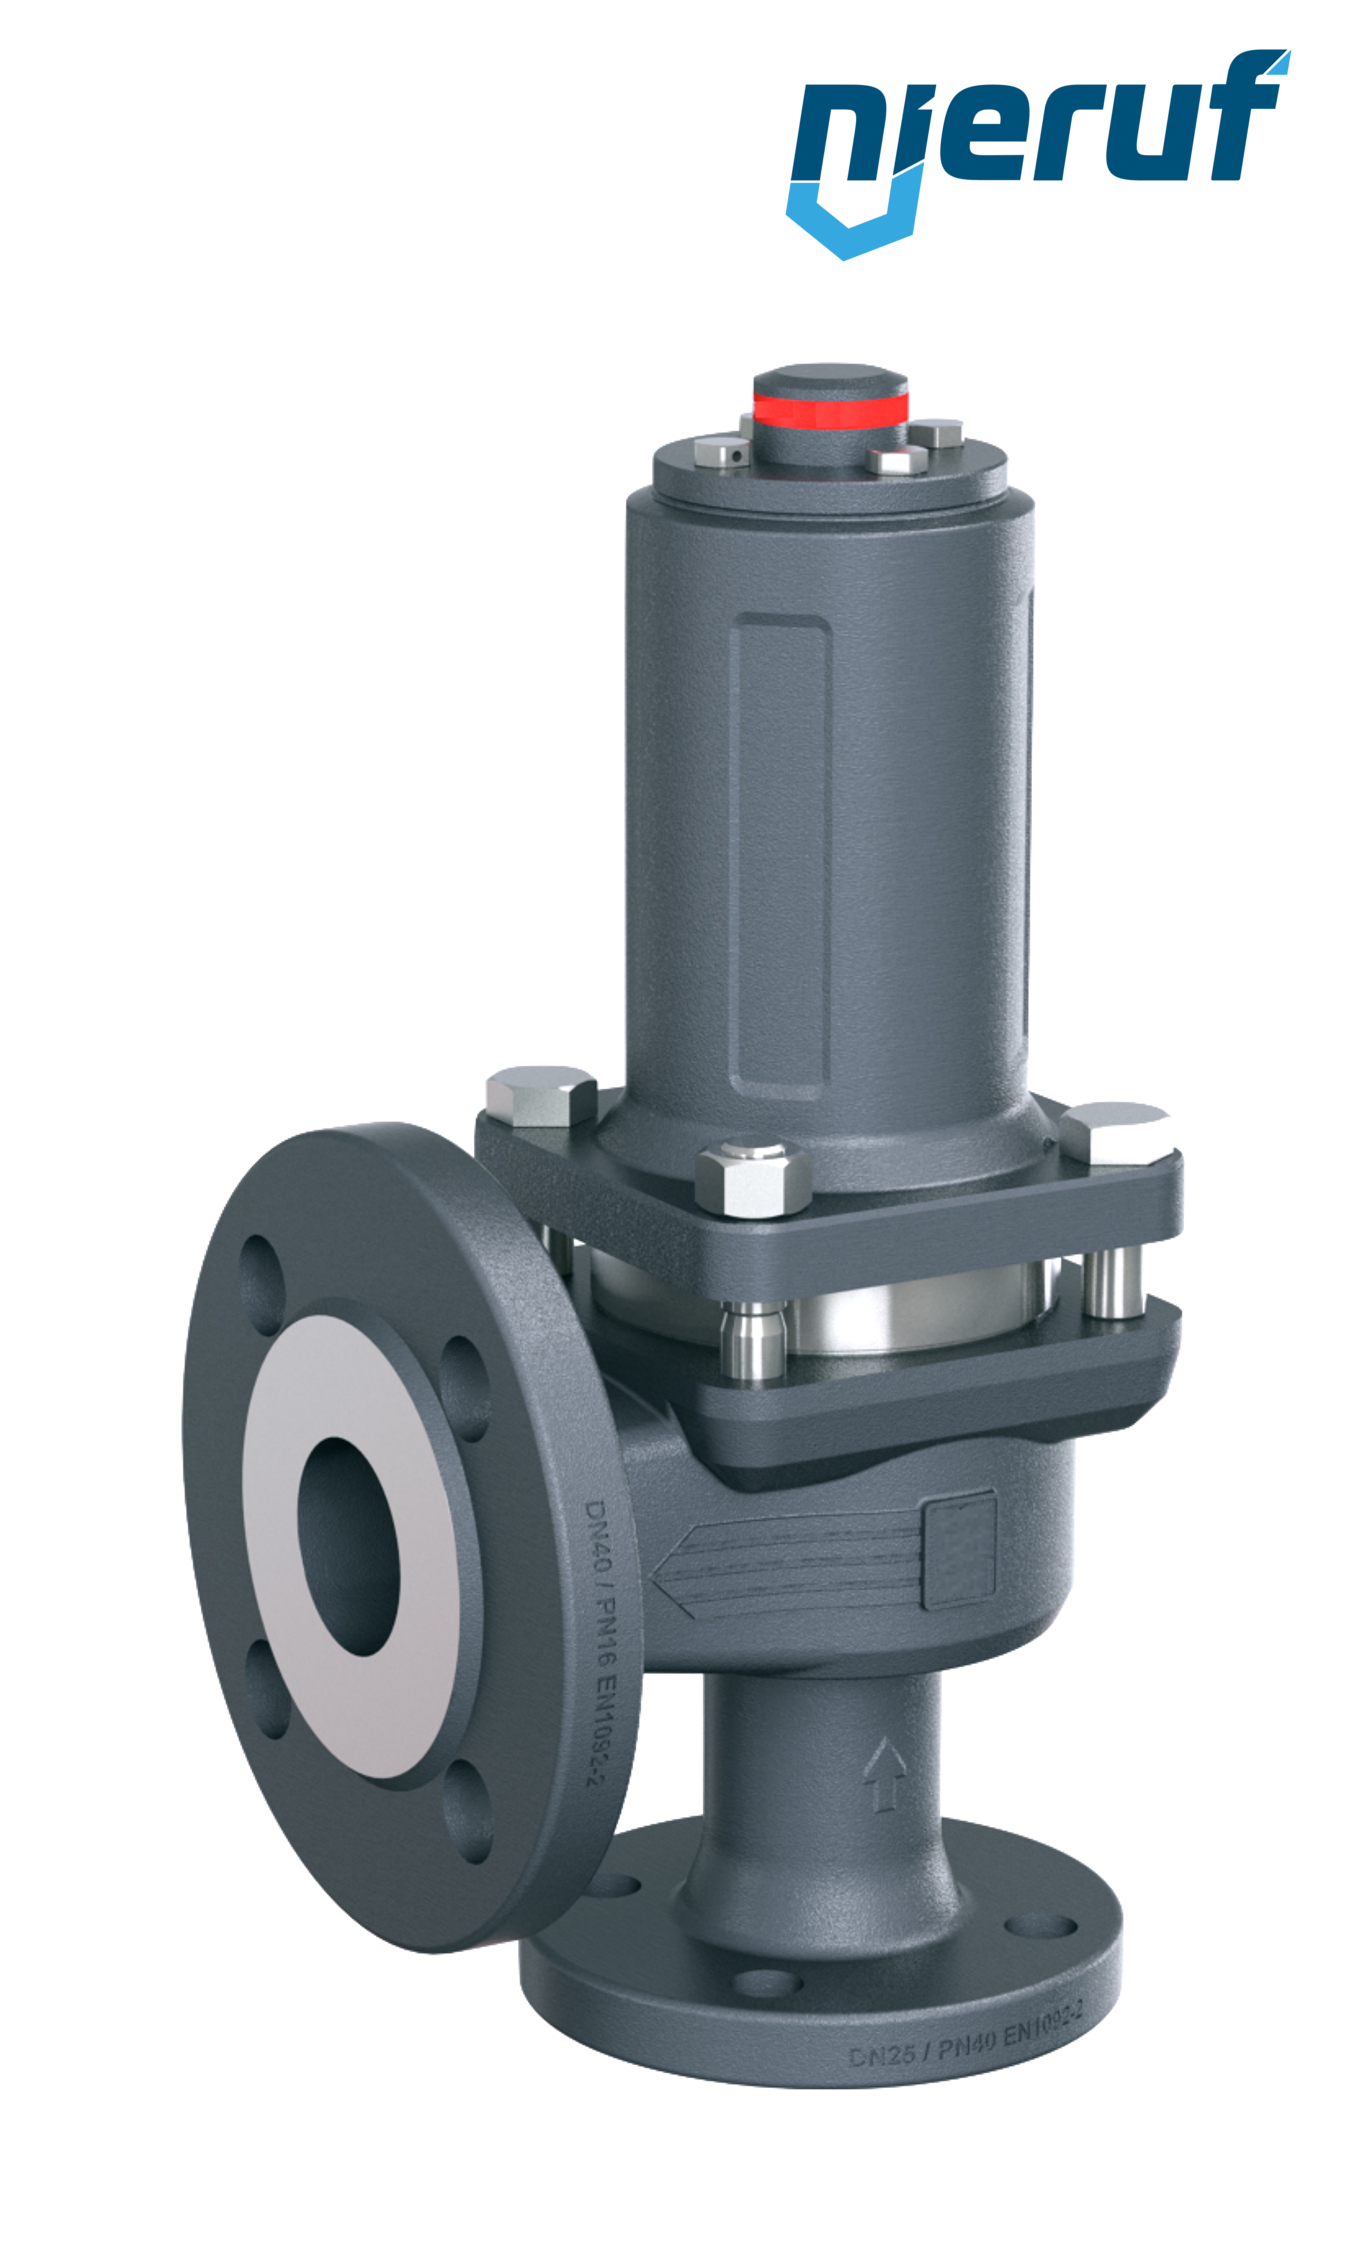 flange-safety valve DN50/DN80 SF06, gastight bonnet FKM, without lifting device